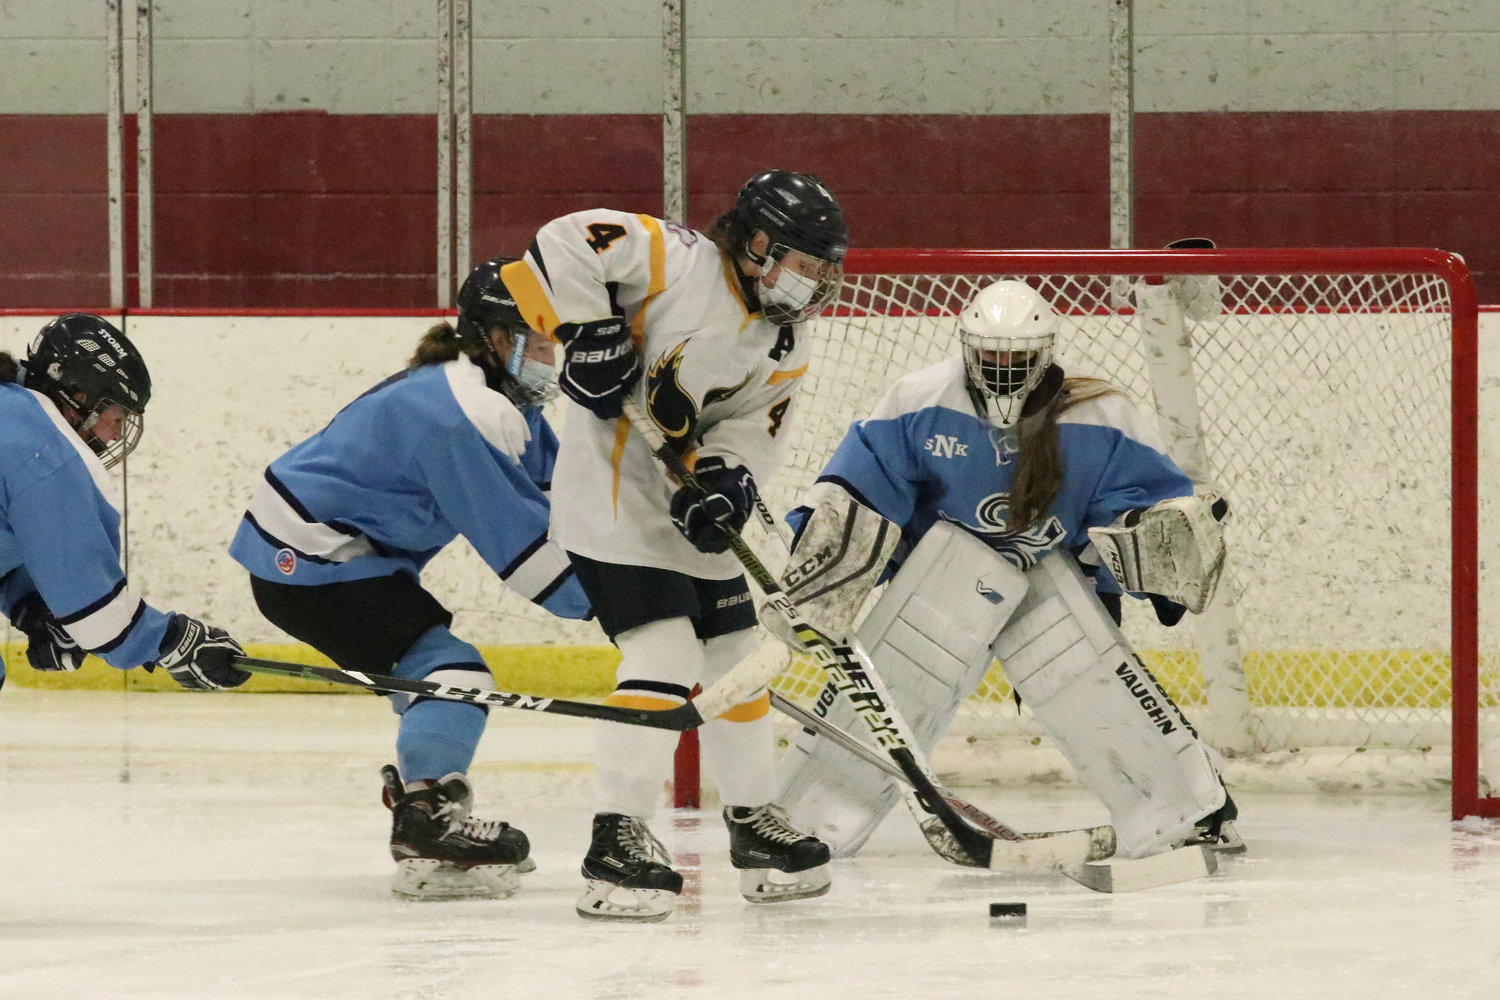 Marissa Levreault skates to the front of the net with the puck in the third period of Game 2.